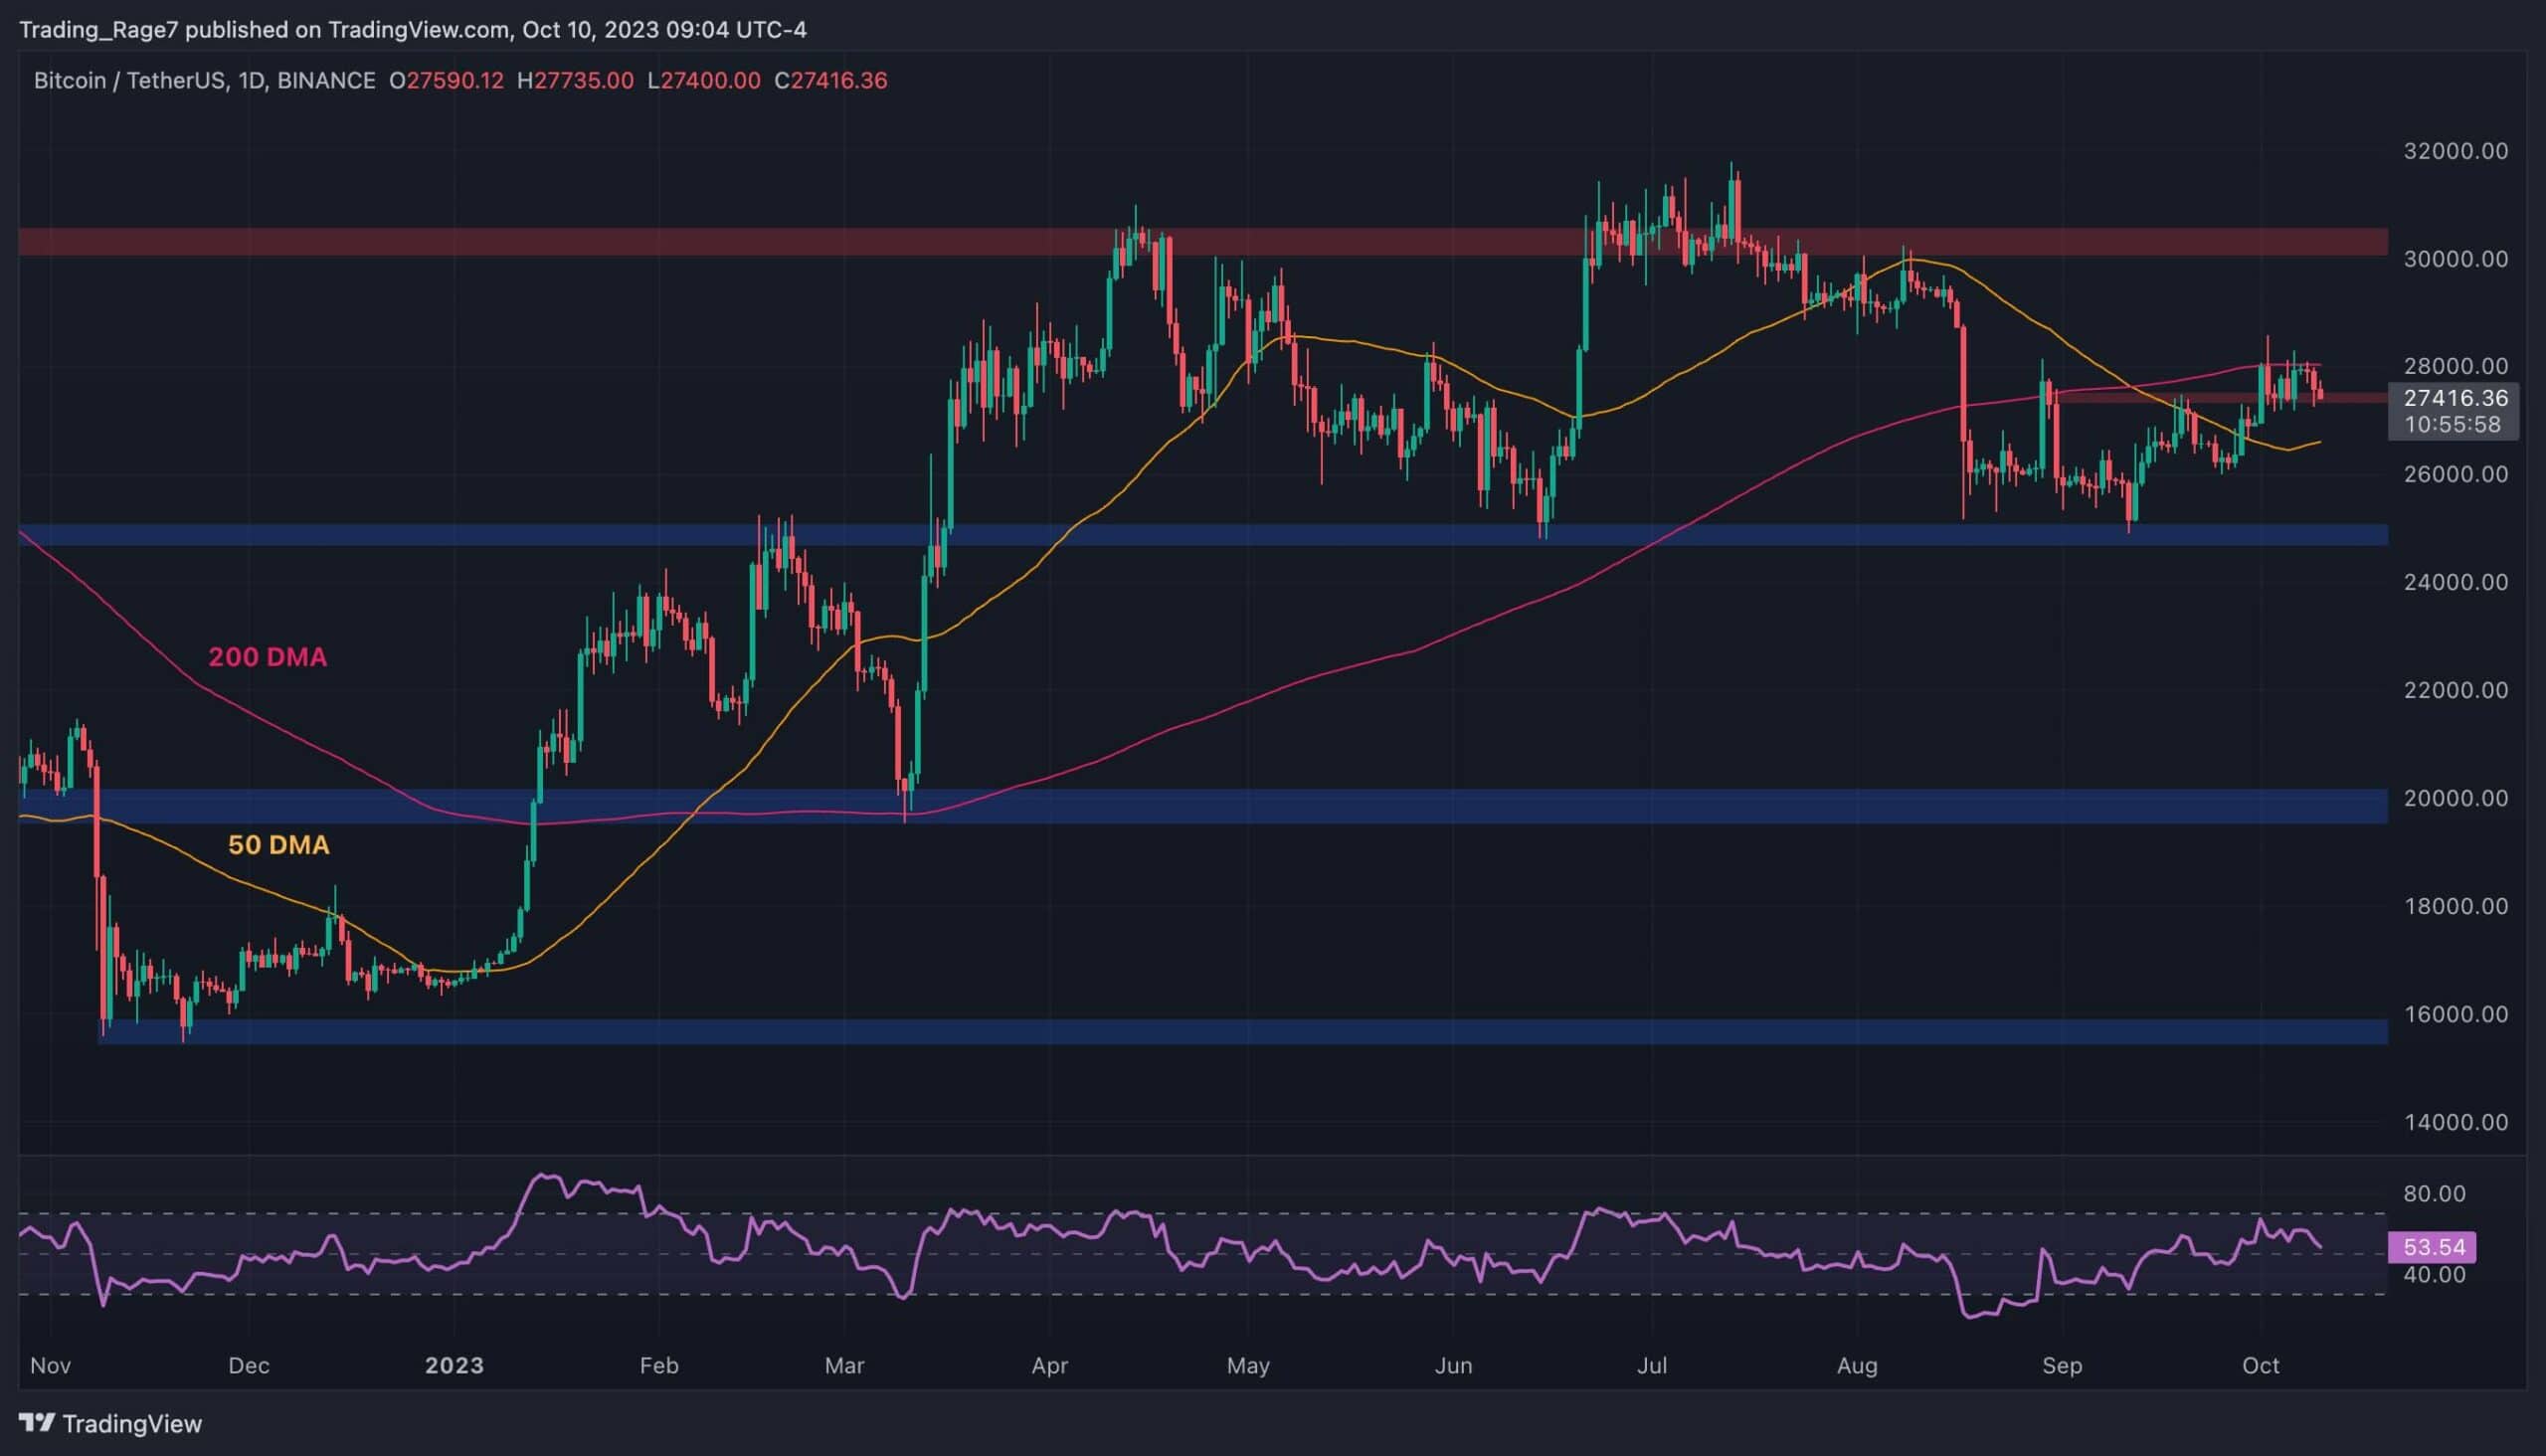 This-is-bitcoin’s-first-line-of-support-if-the-bears-prevail-(btc-price-analysis)